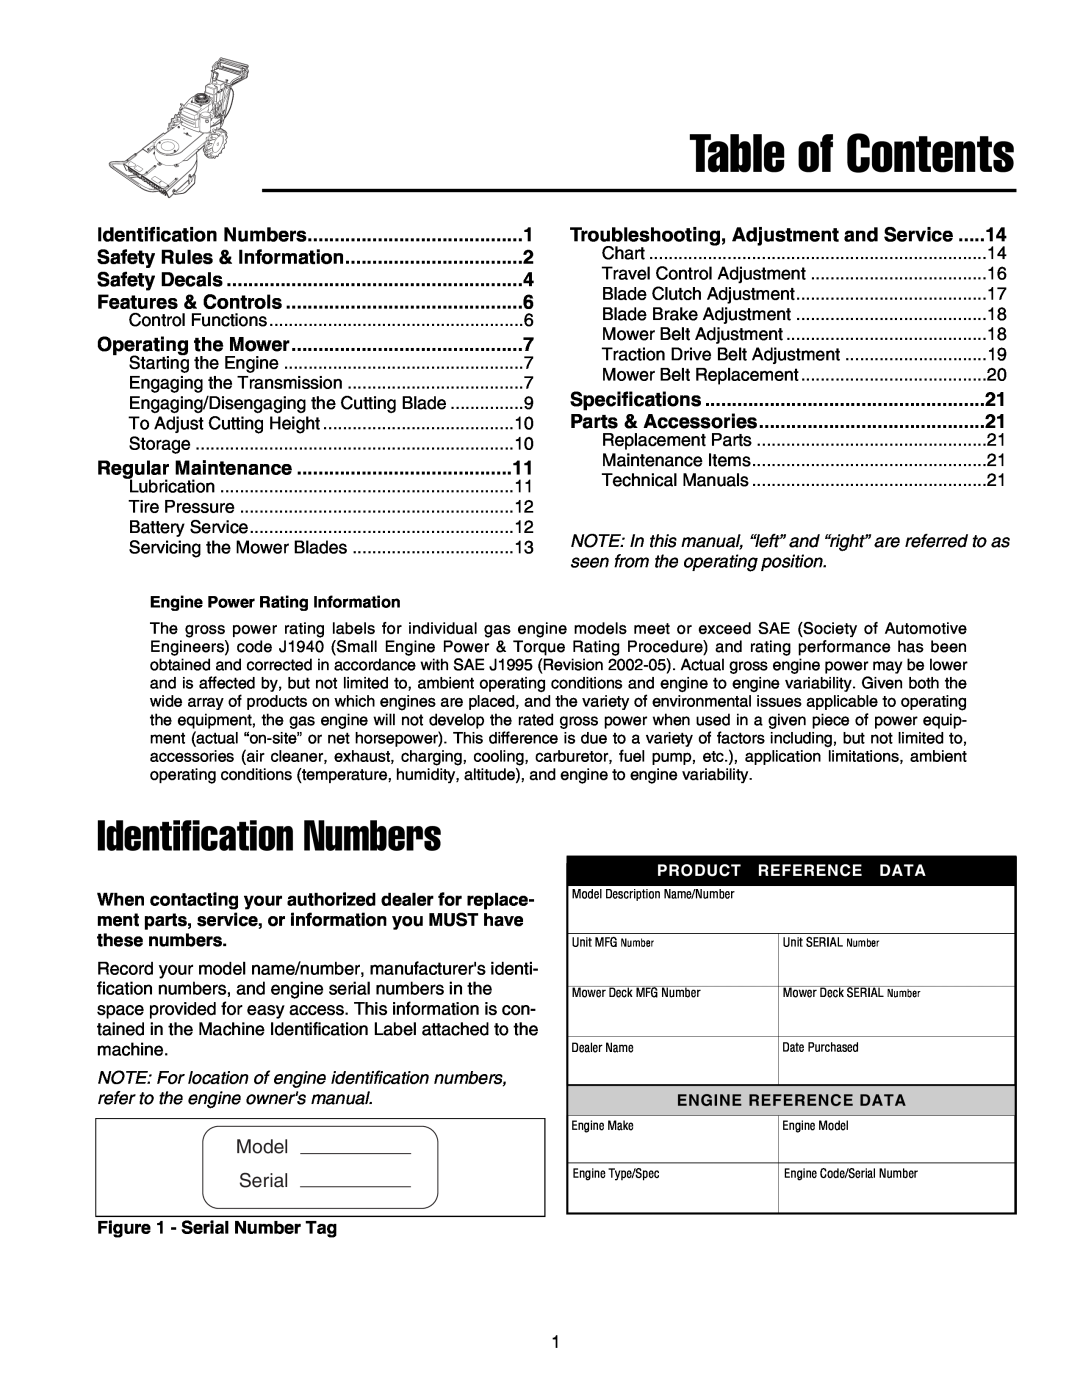 Briggs & Stratton FB13250BS Identification Numbers, NOTE For location of engine identification numbers, Table of Contents 